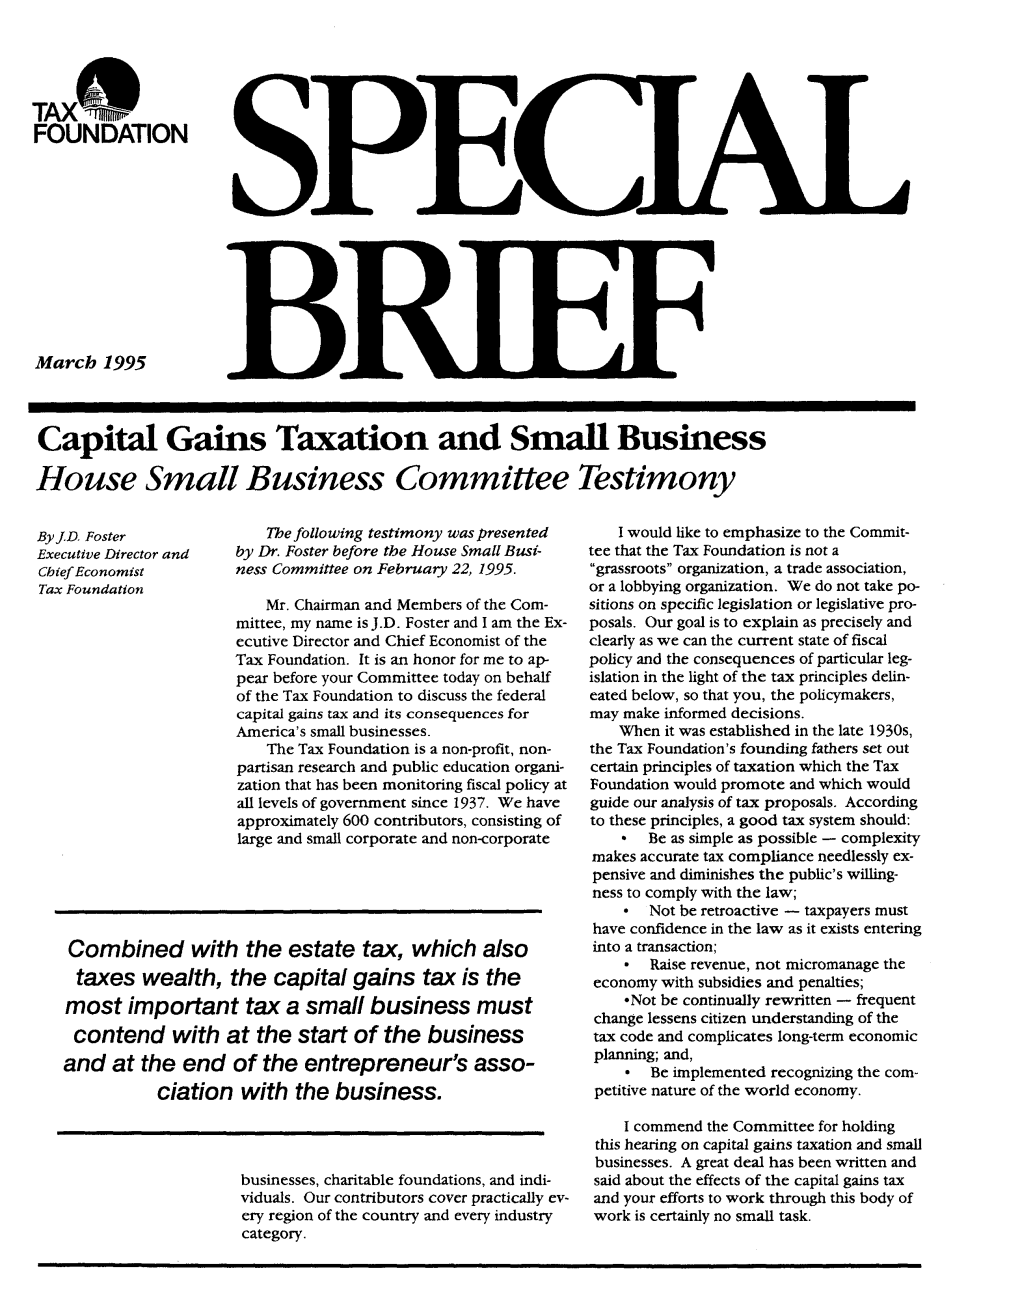 Capital Gains Taxation and Small Business House Small Business Committee Testimony